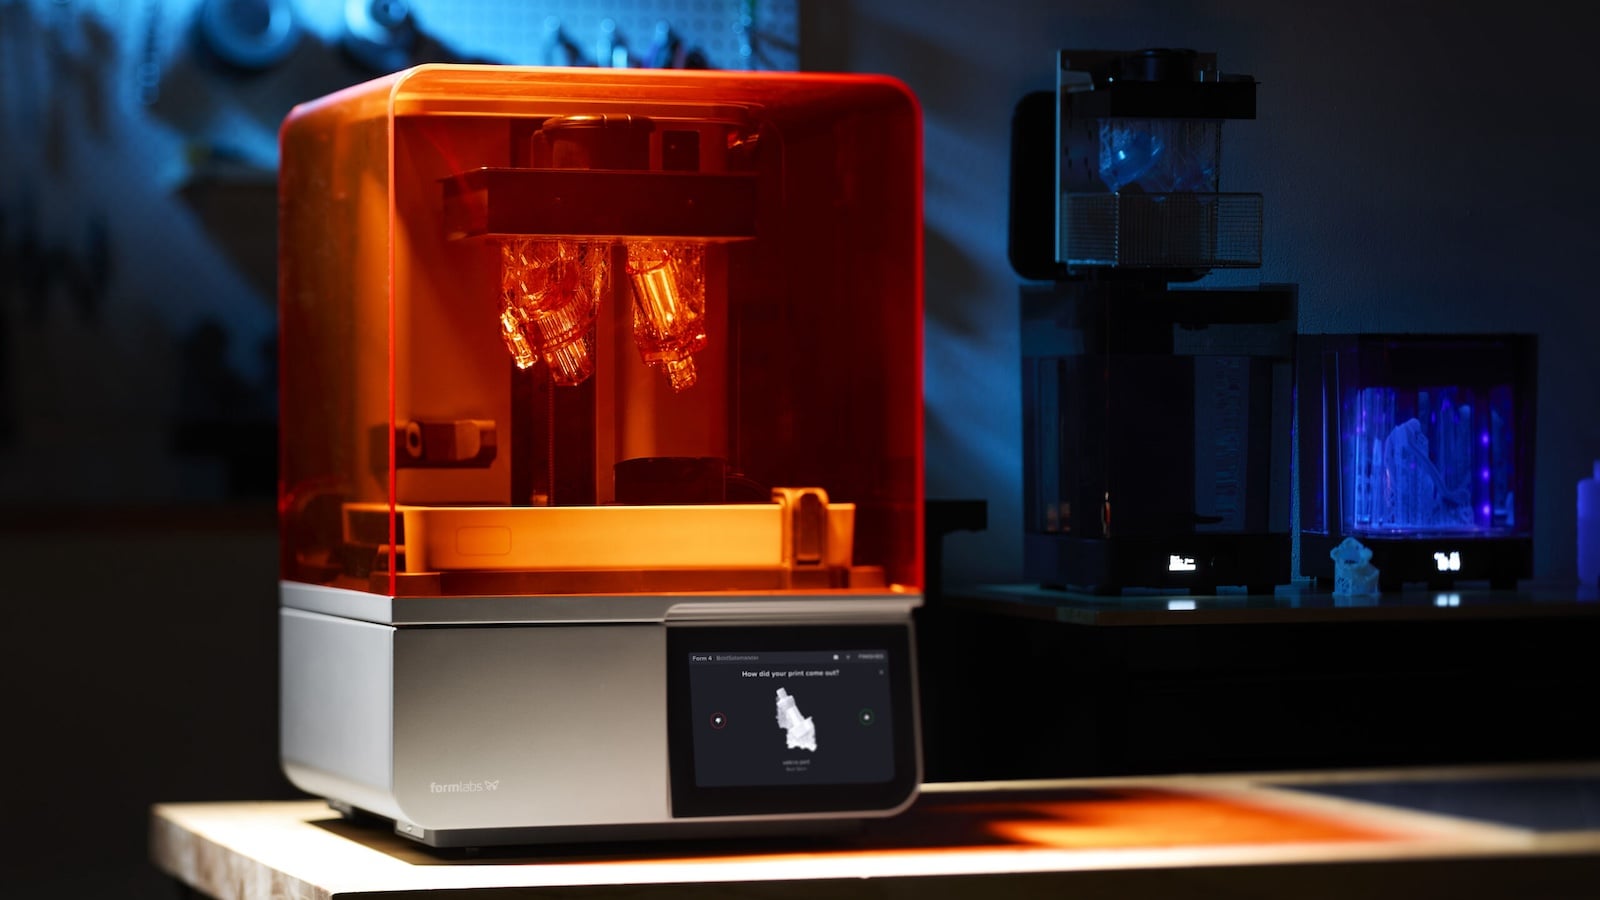 This fast 3D printer creates most projects in under 2 hours